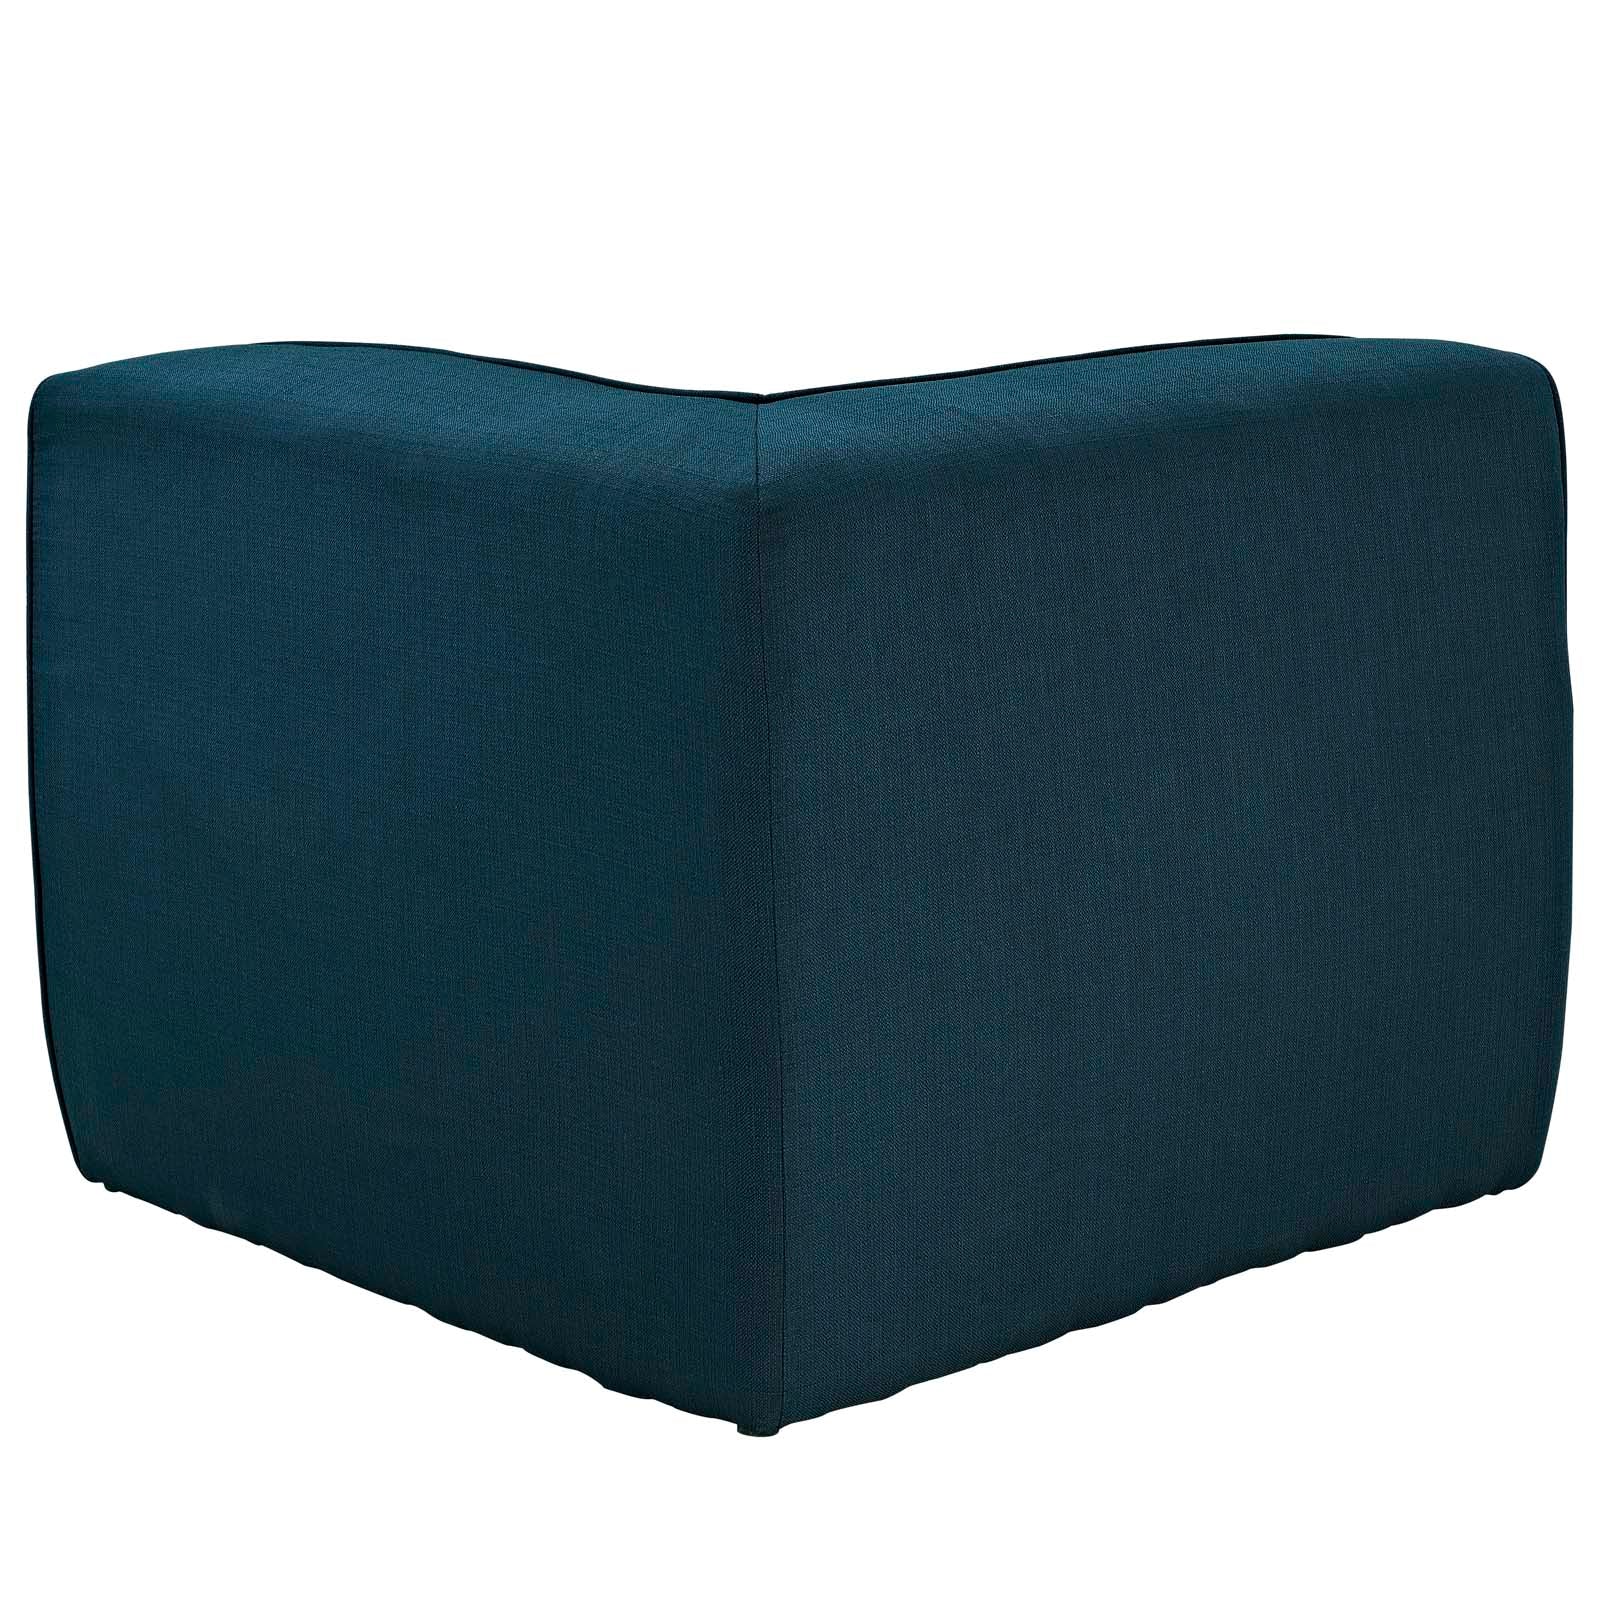 Modway Accent Chairs - Align Upholstered Fabric Corner Sofa Azure